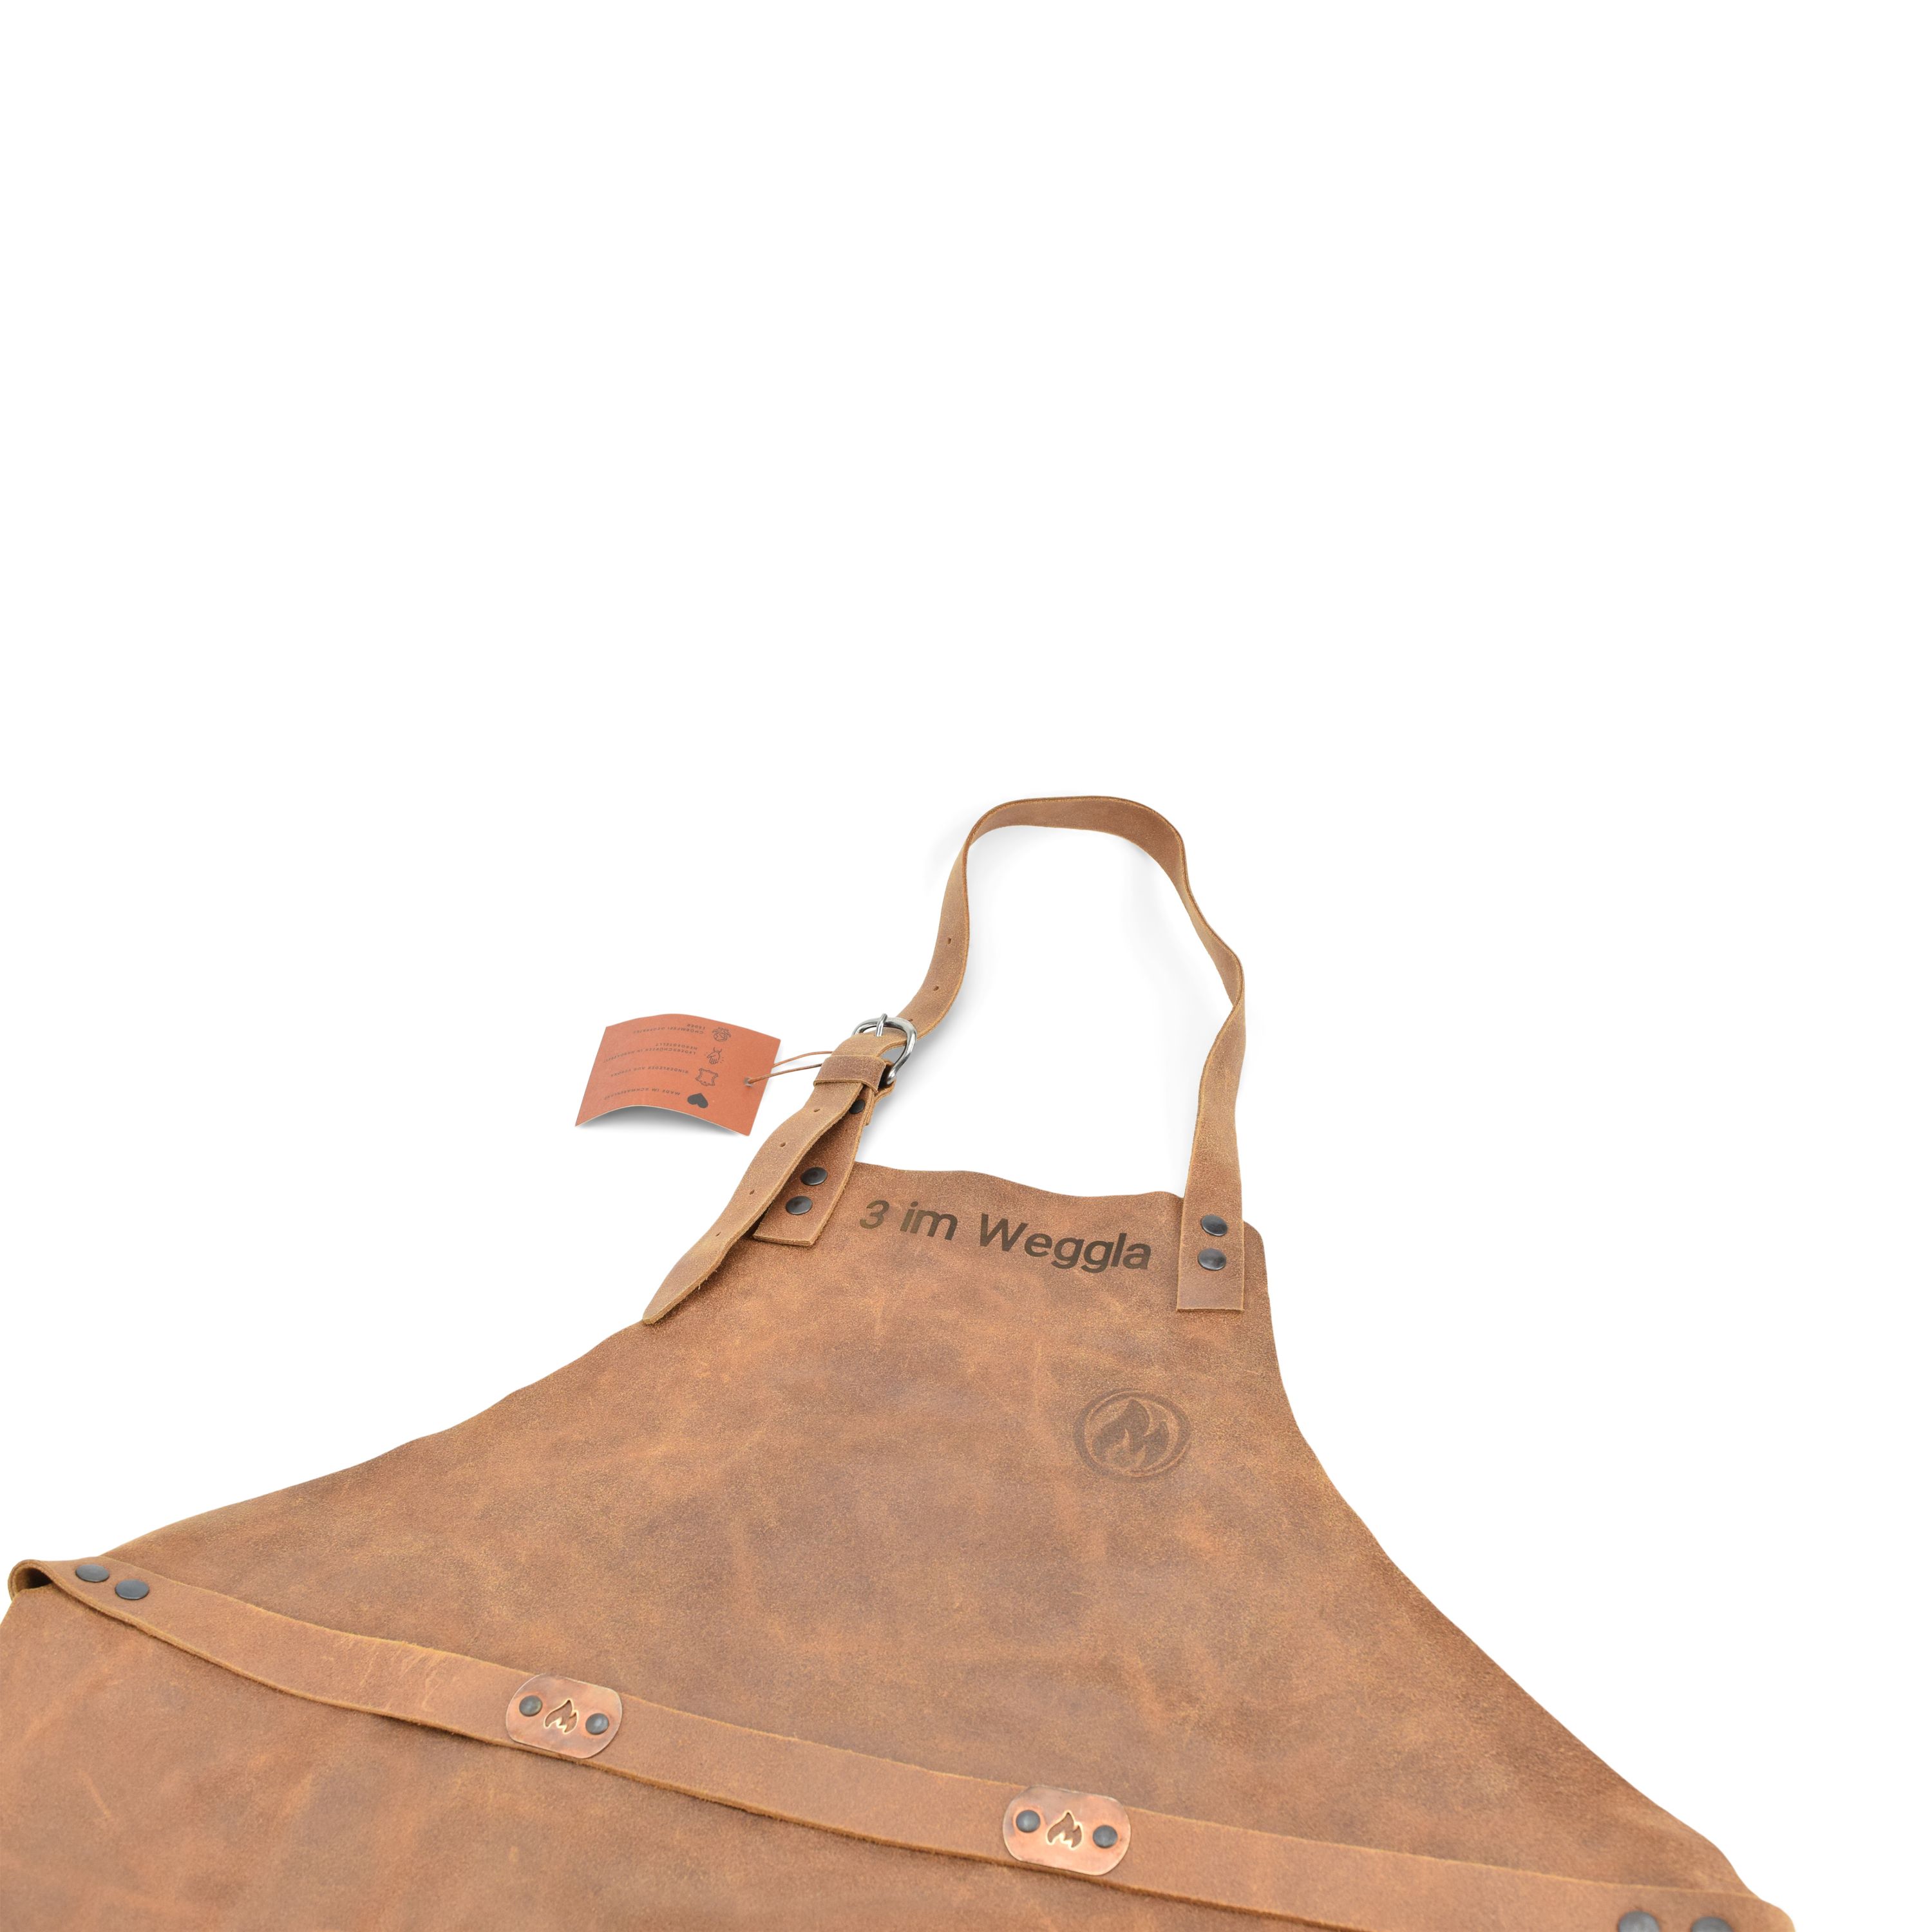 Buffalo Leather Barbecue Apron made of Italian leather with copper fittings